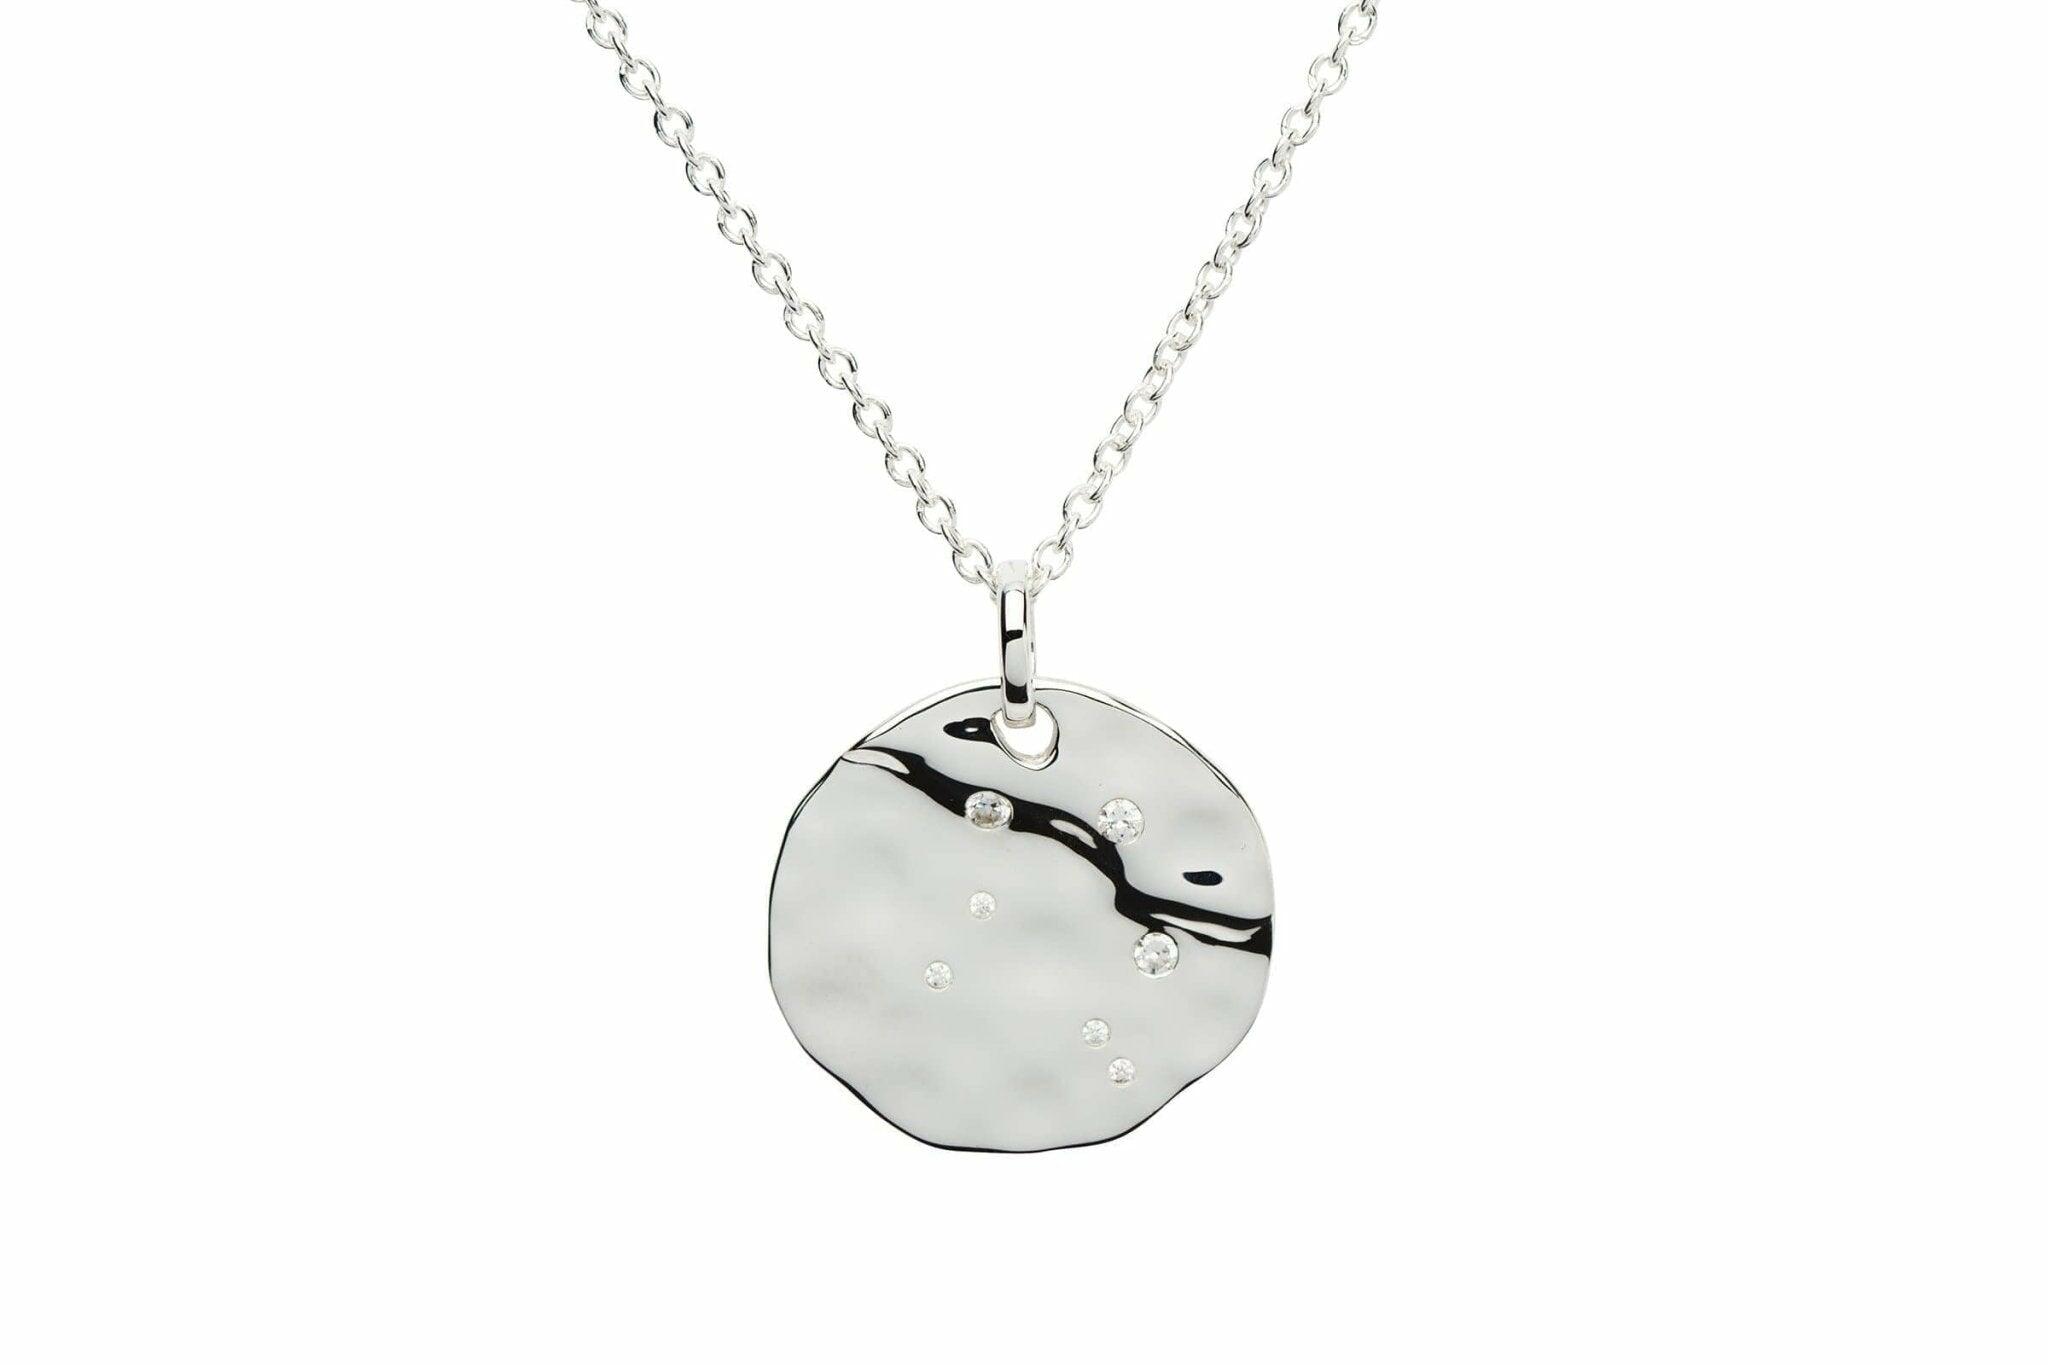 Unique & Co Hammered Sterling Silver & Cubic Zirconia Zodiac Constellation Libra Birthday Necklace Pendant - The Classic Watch Buyers Club Ltd